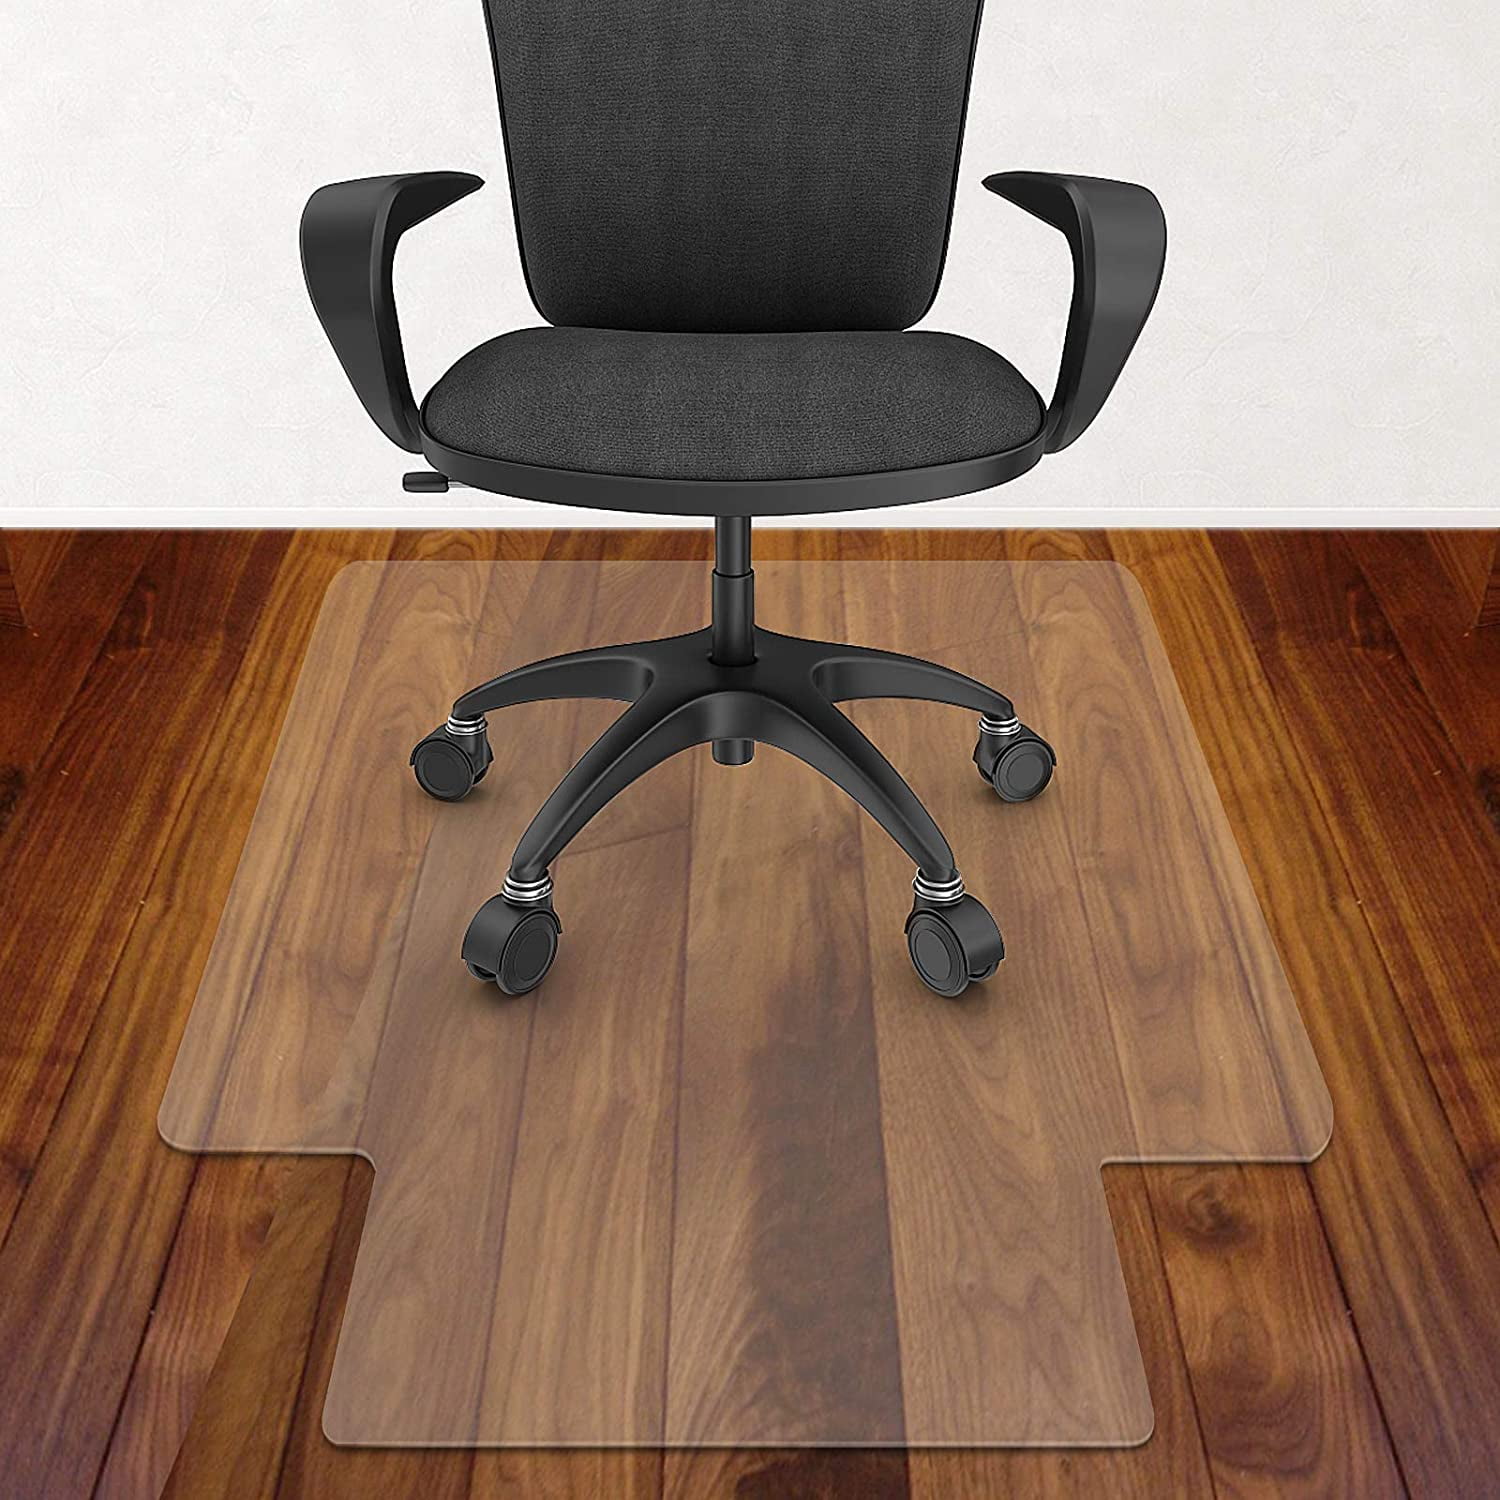 Clear/Transparent Office Chair Mat for Hardwood Floor Many Sizes Available Hard Floor Chair Mat with Lip 36 x 48 